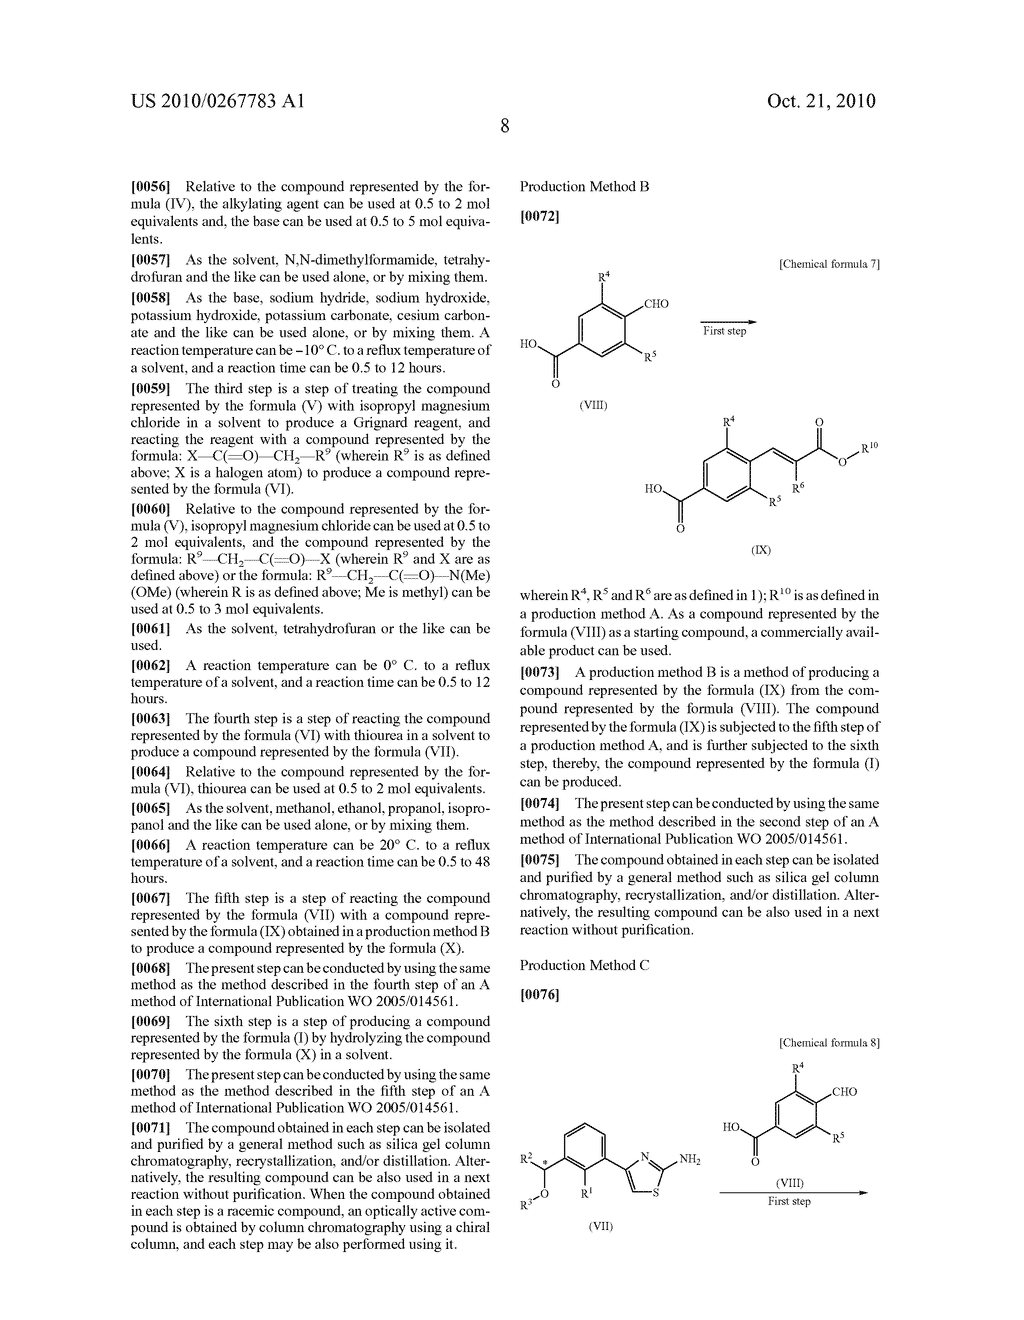 PHARMACEUTICAL COMPOSITION CONTAINING OPTICALLY ACTIVE COMPOUND HAVING THROMBOPOIETIN RECEPTOR AGONIST ACTIVITY, AND INTERMEDIATE THEREFOR - diagram, schematic, and image 15